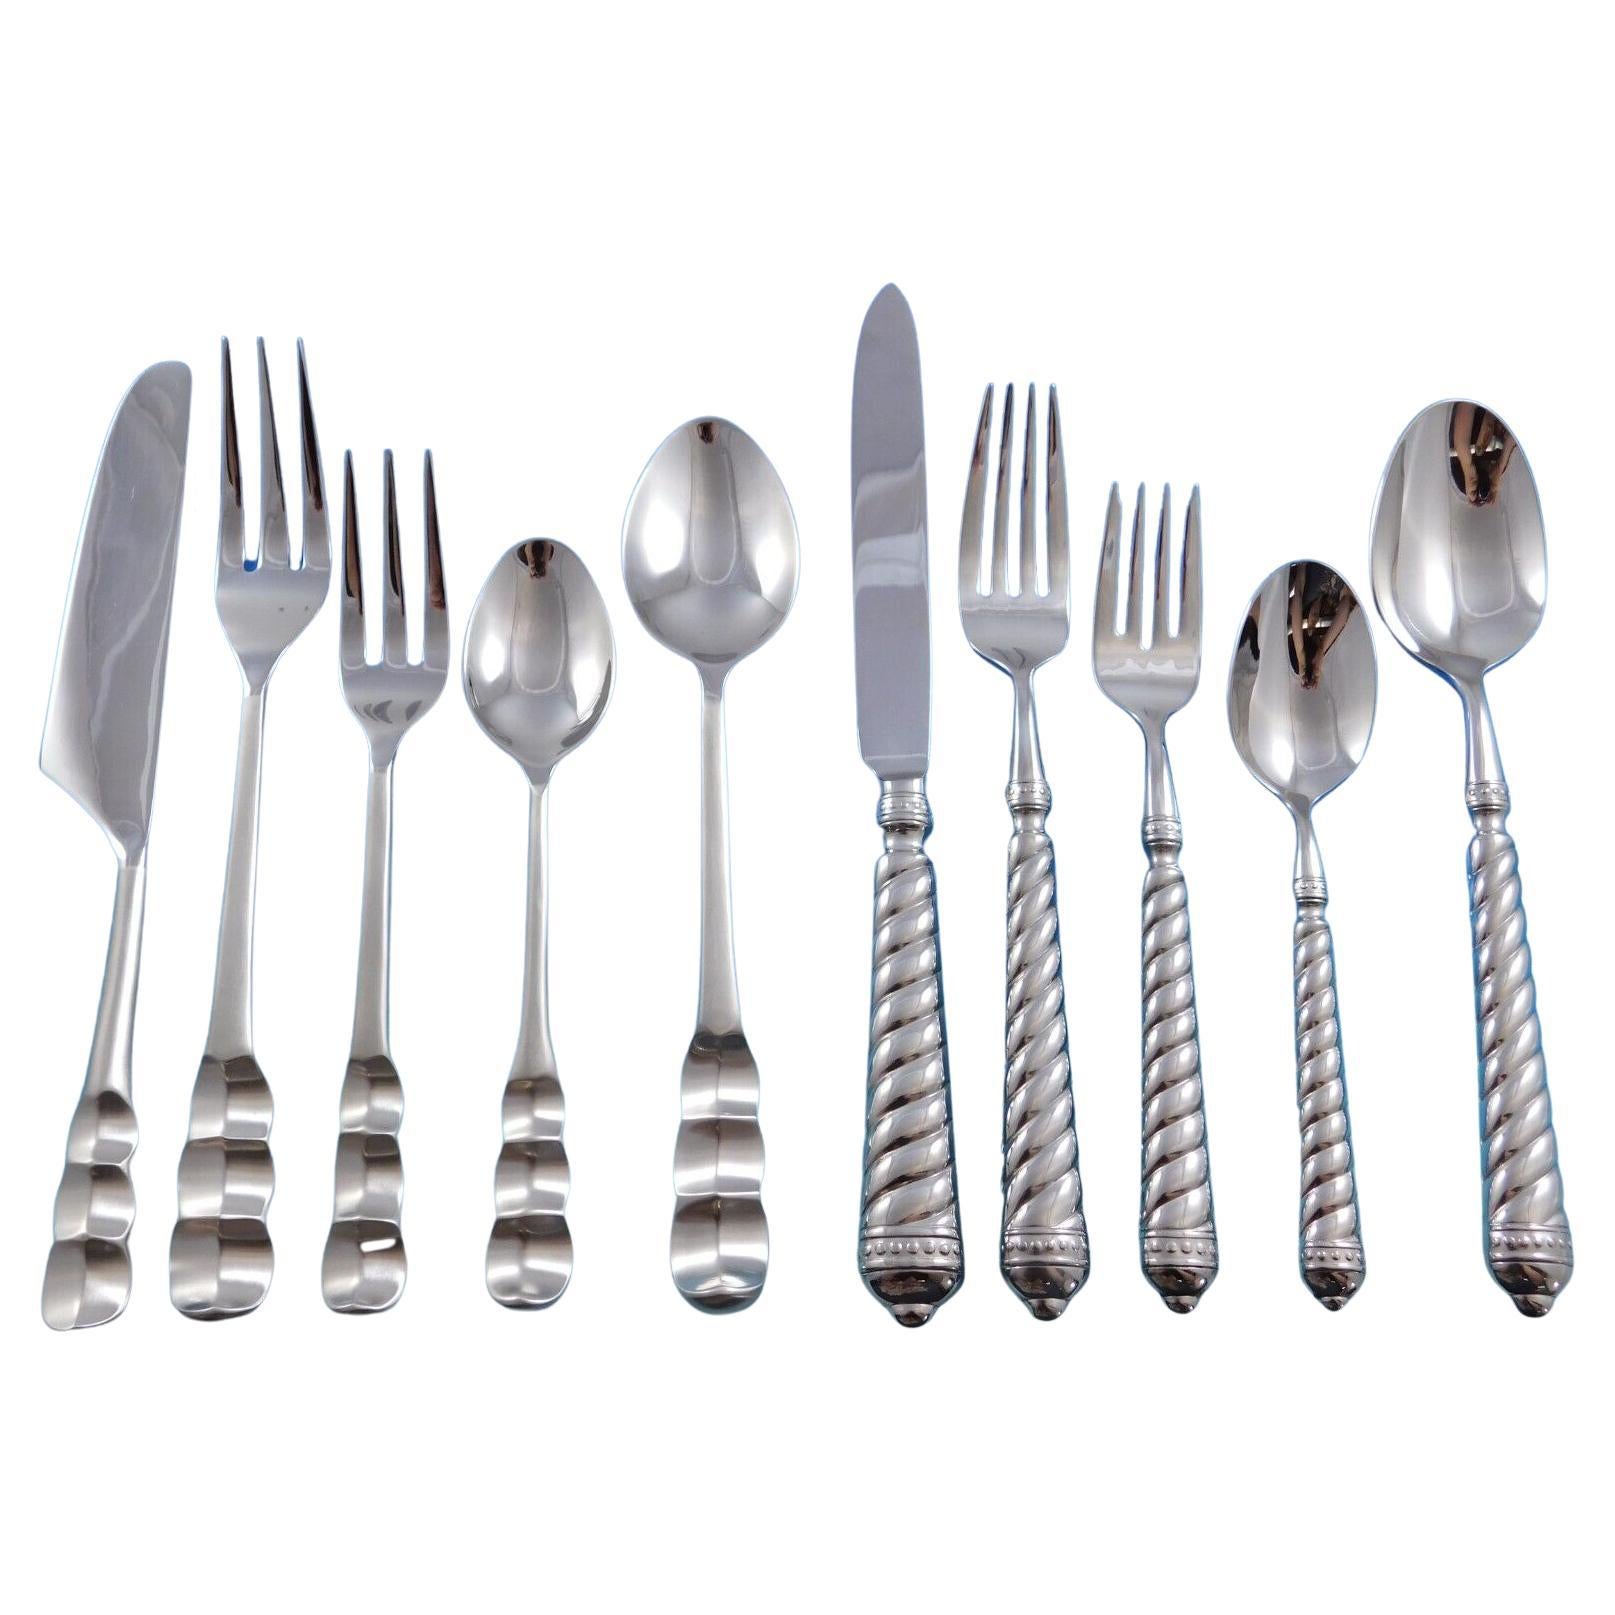 Designer Mixed Stainless Steel Flatware Set #5 Service 44 Pieces Modern Unused For Sale